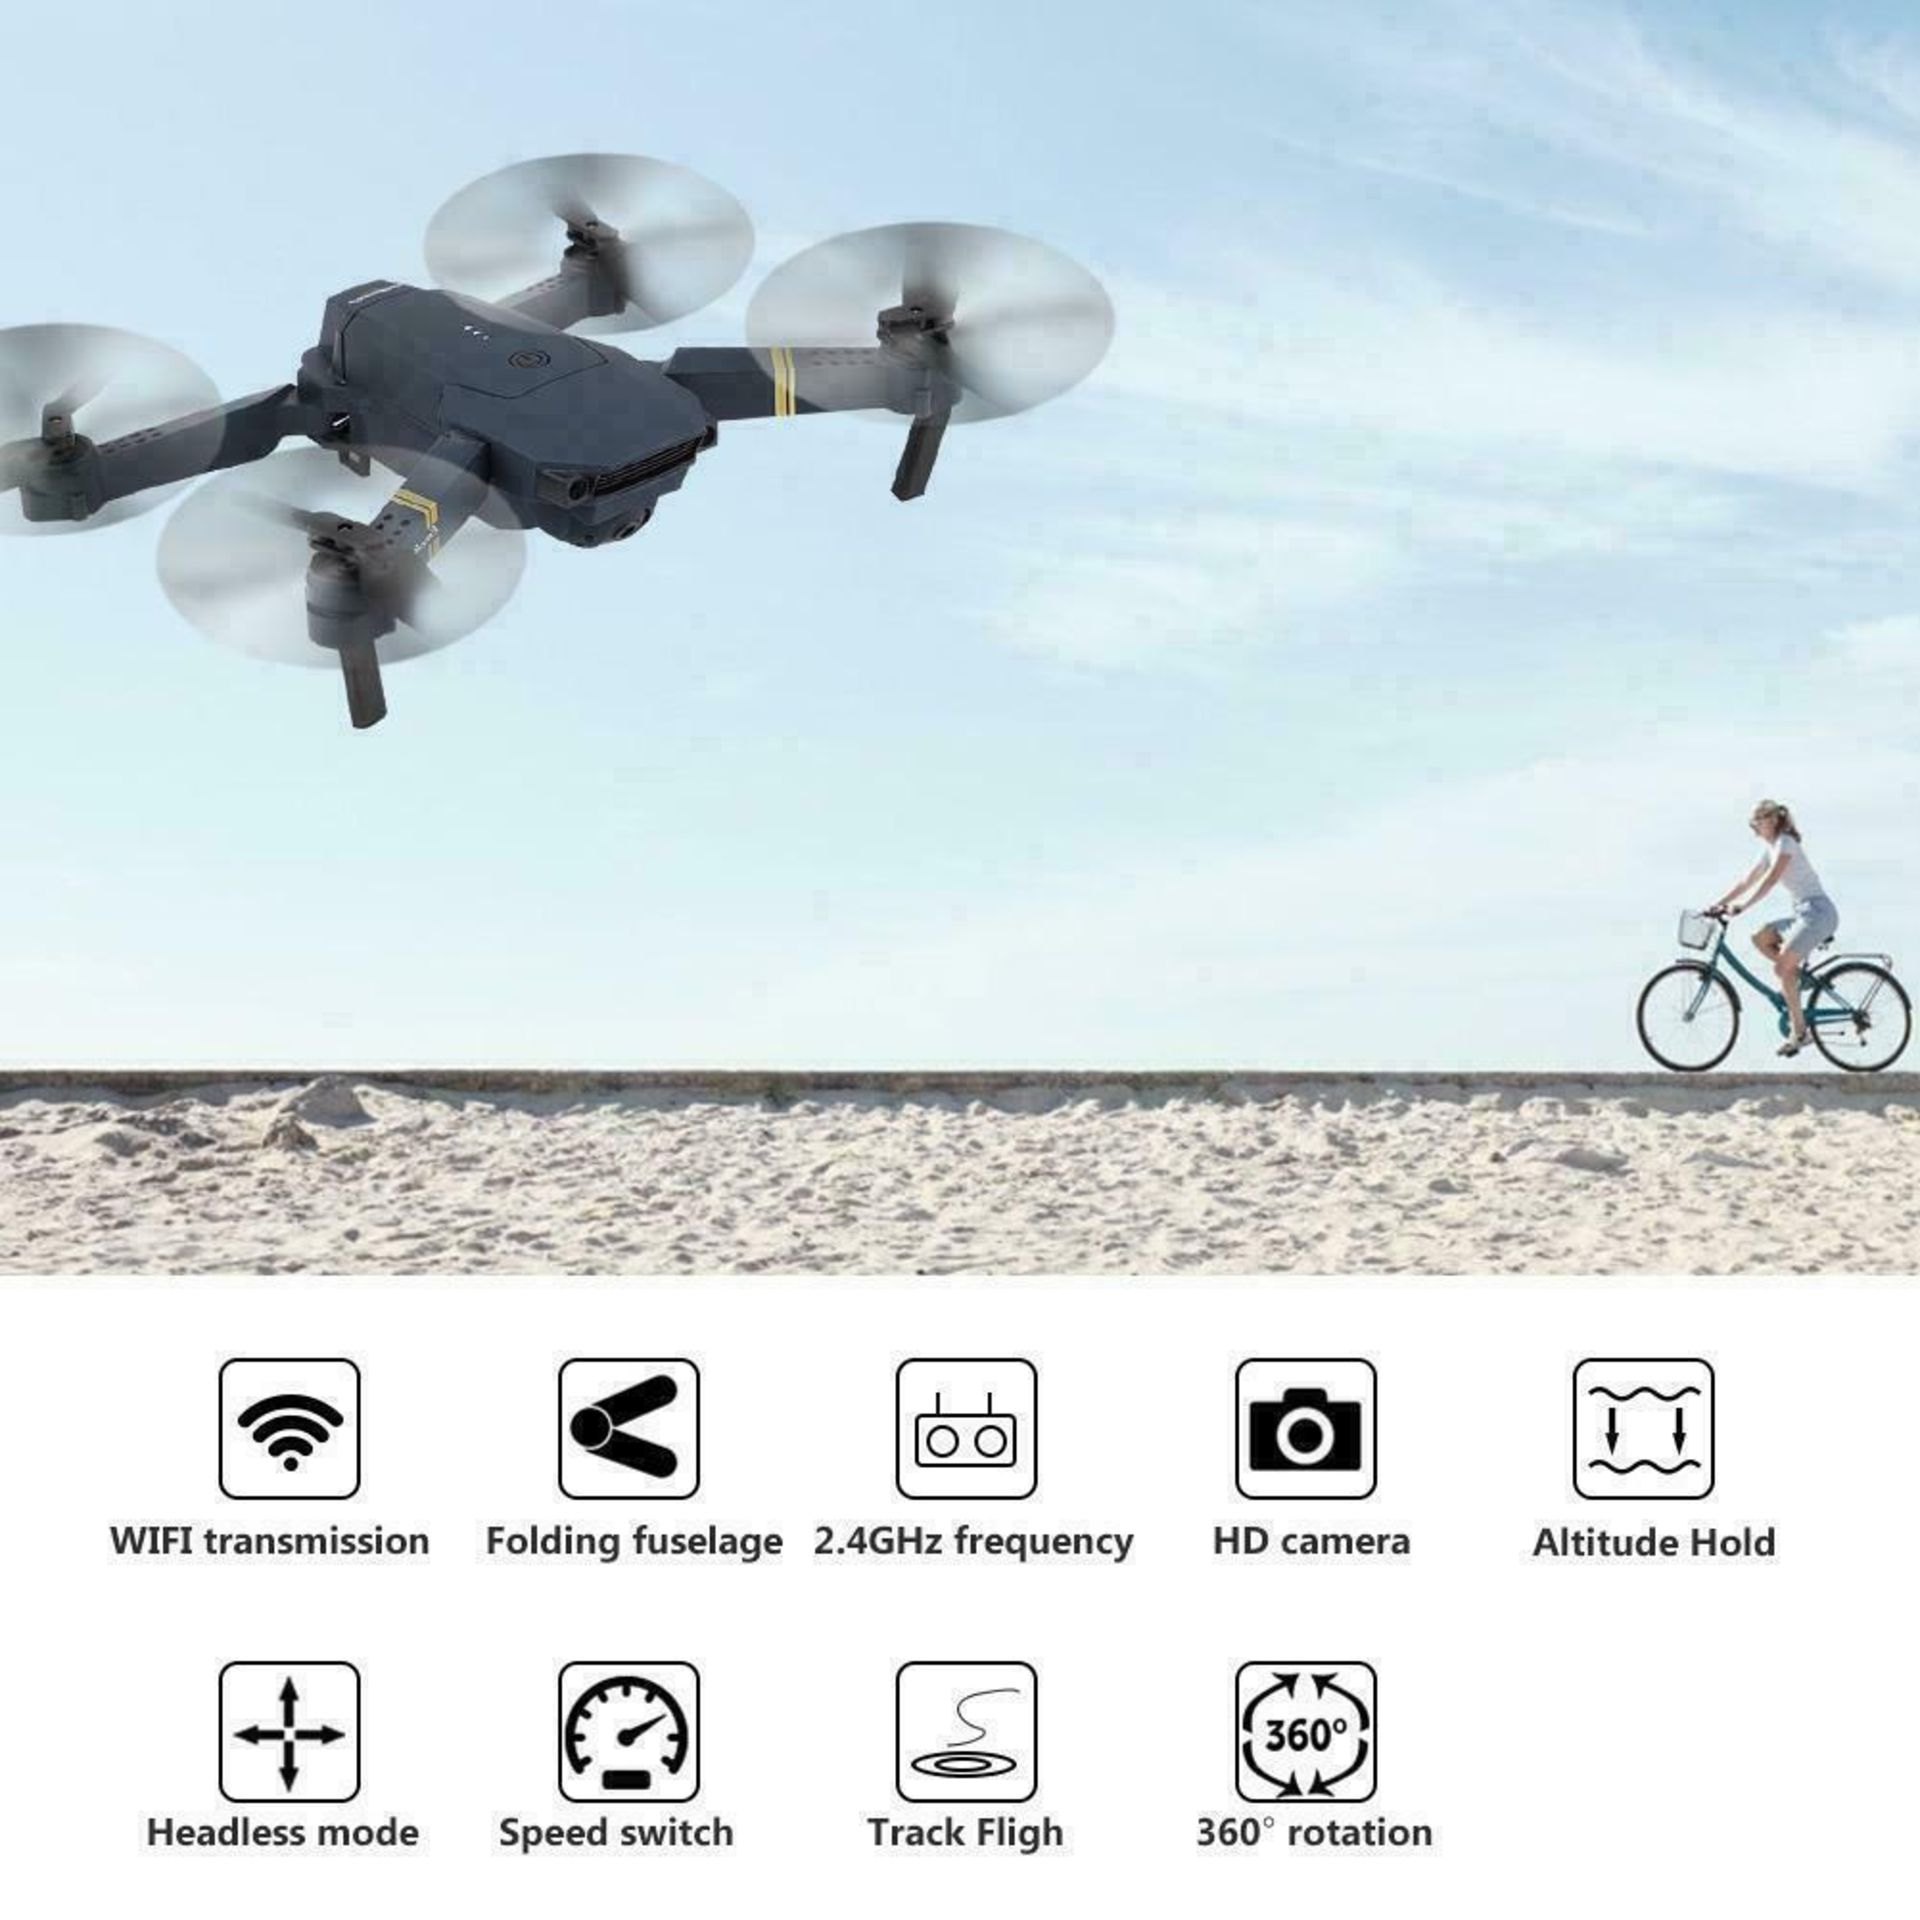 DRONE X REMOTE CONTROL QUADCOPTER 1080P HD CAMERA - THE LATEST TECH ONLY 7 OF THESE LEFT! - Image 5 of 9